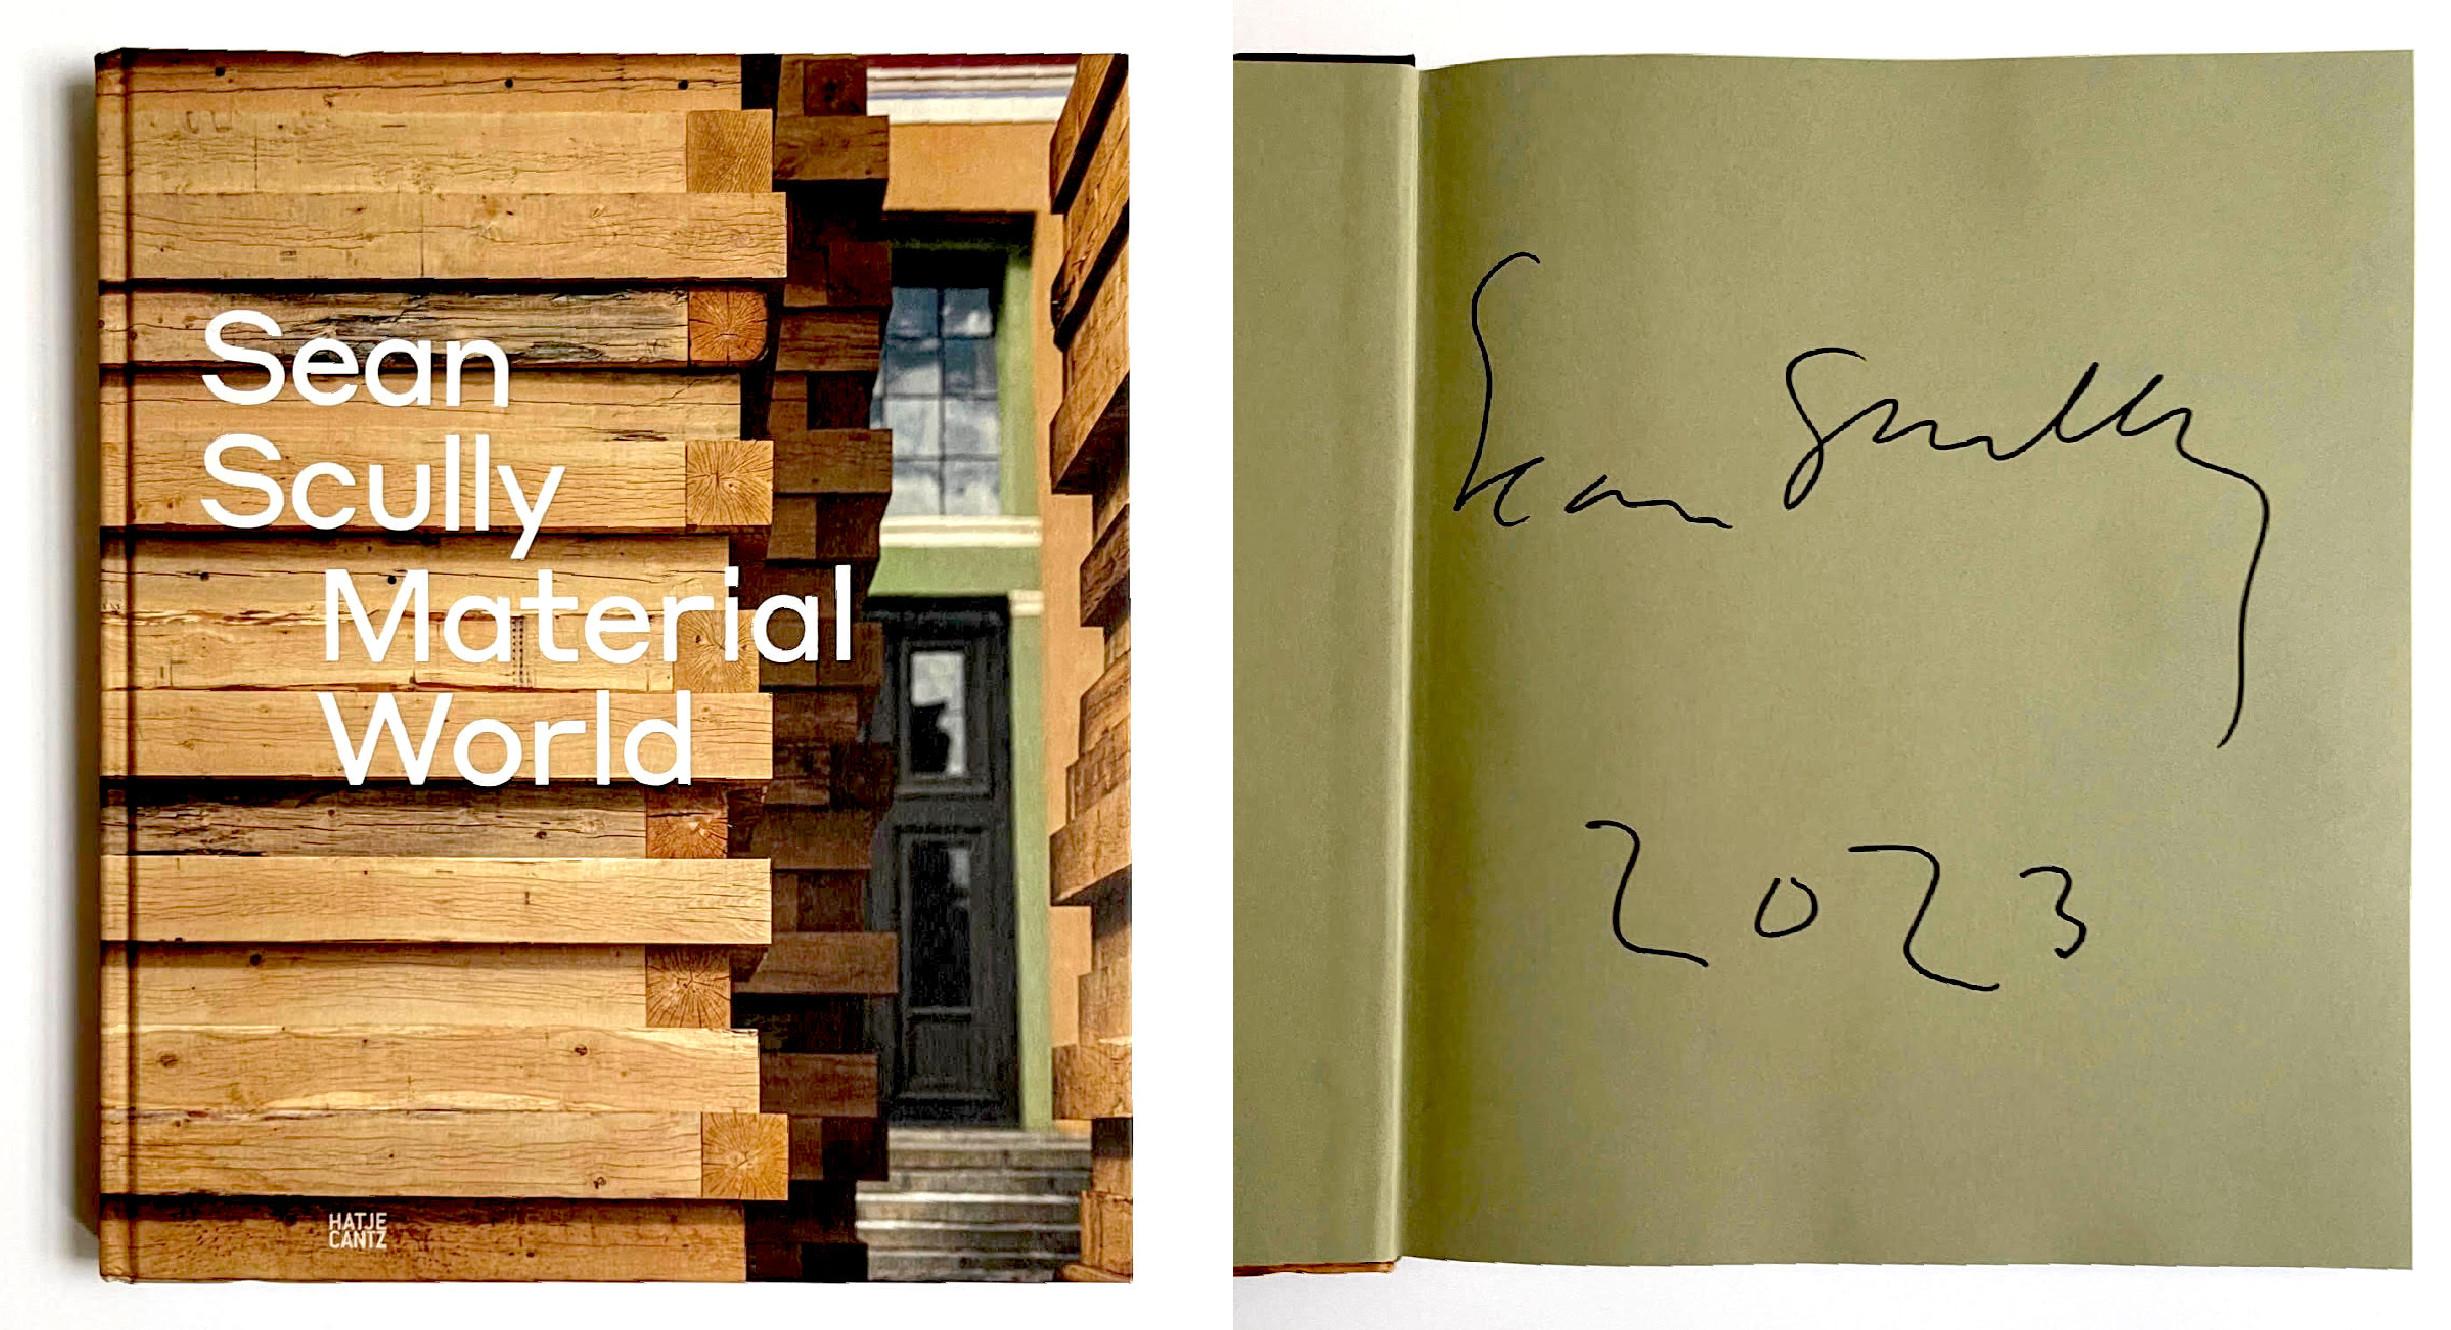 Sean Scully: Material World (Hand signed and dated by Sean Scully), 2022
Hardback monograph on Munken Lynx, 150 gsm paper (hand signed by Sean Scully)
Boldly signed and dated by Sean Scully in black marker on the first front end page
11 1/2 × 9 3/4